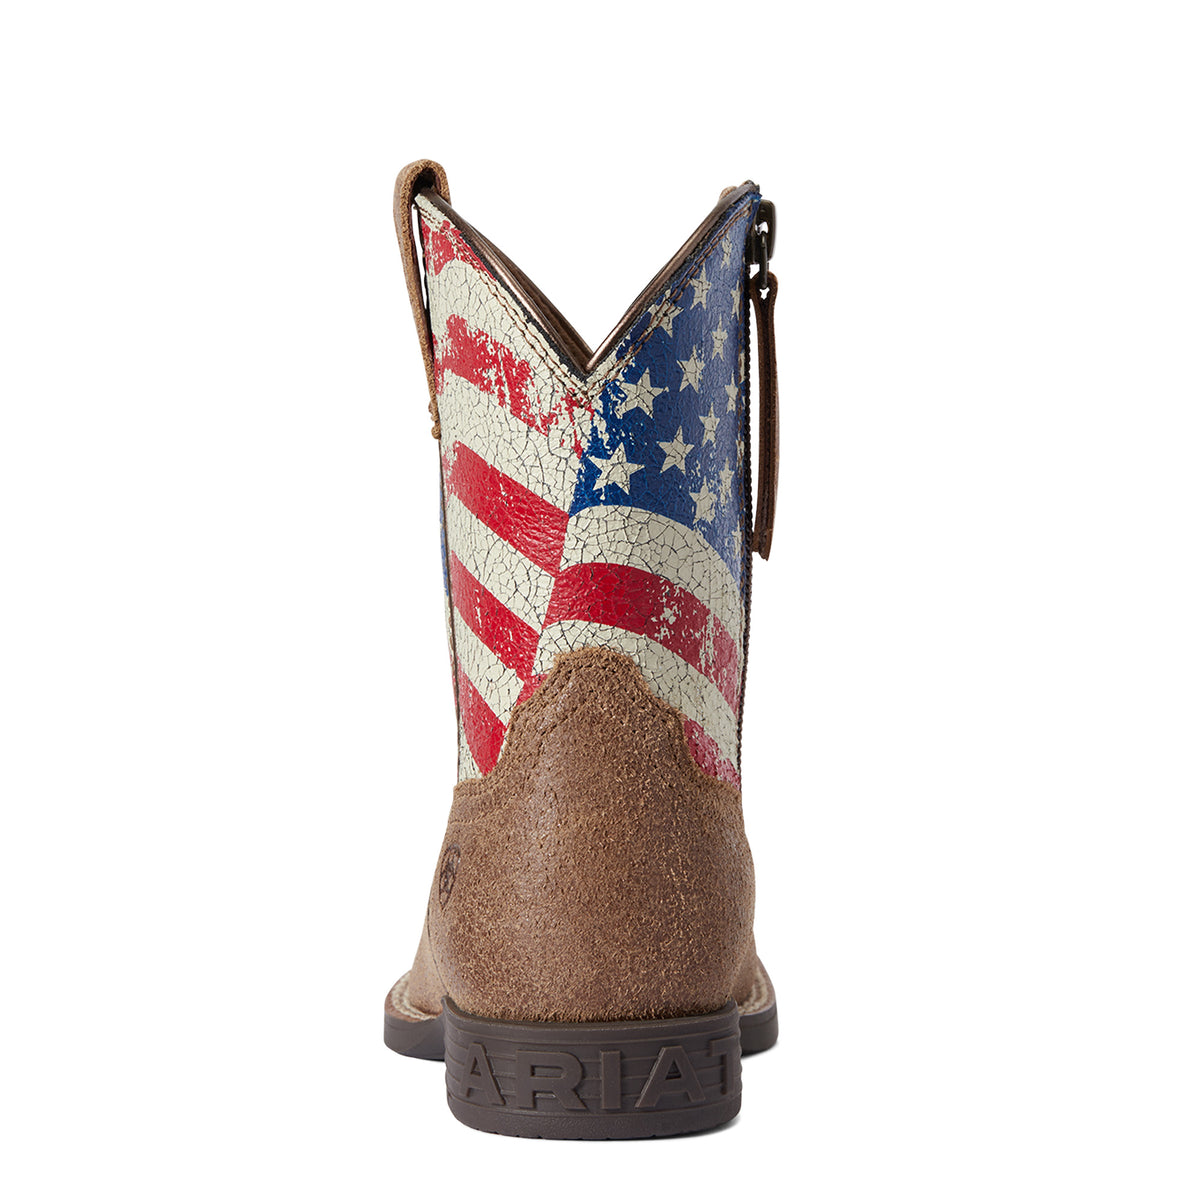 Kid's Ariat Stars and Stripes American Flag Boot